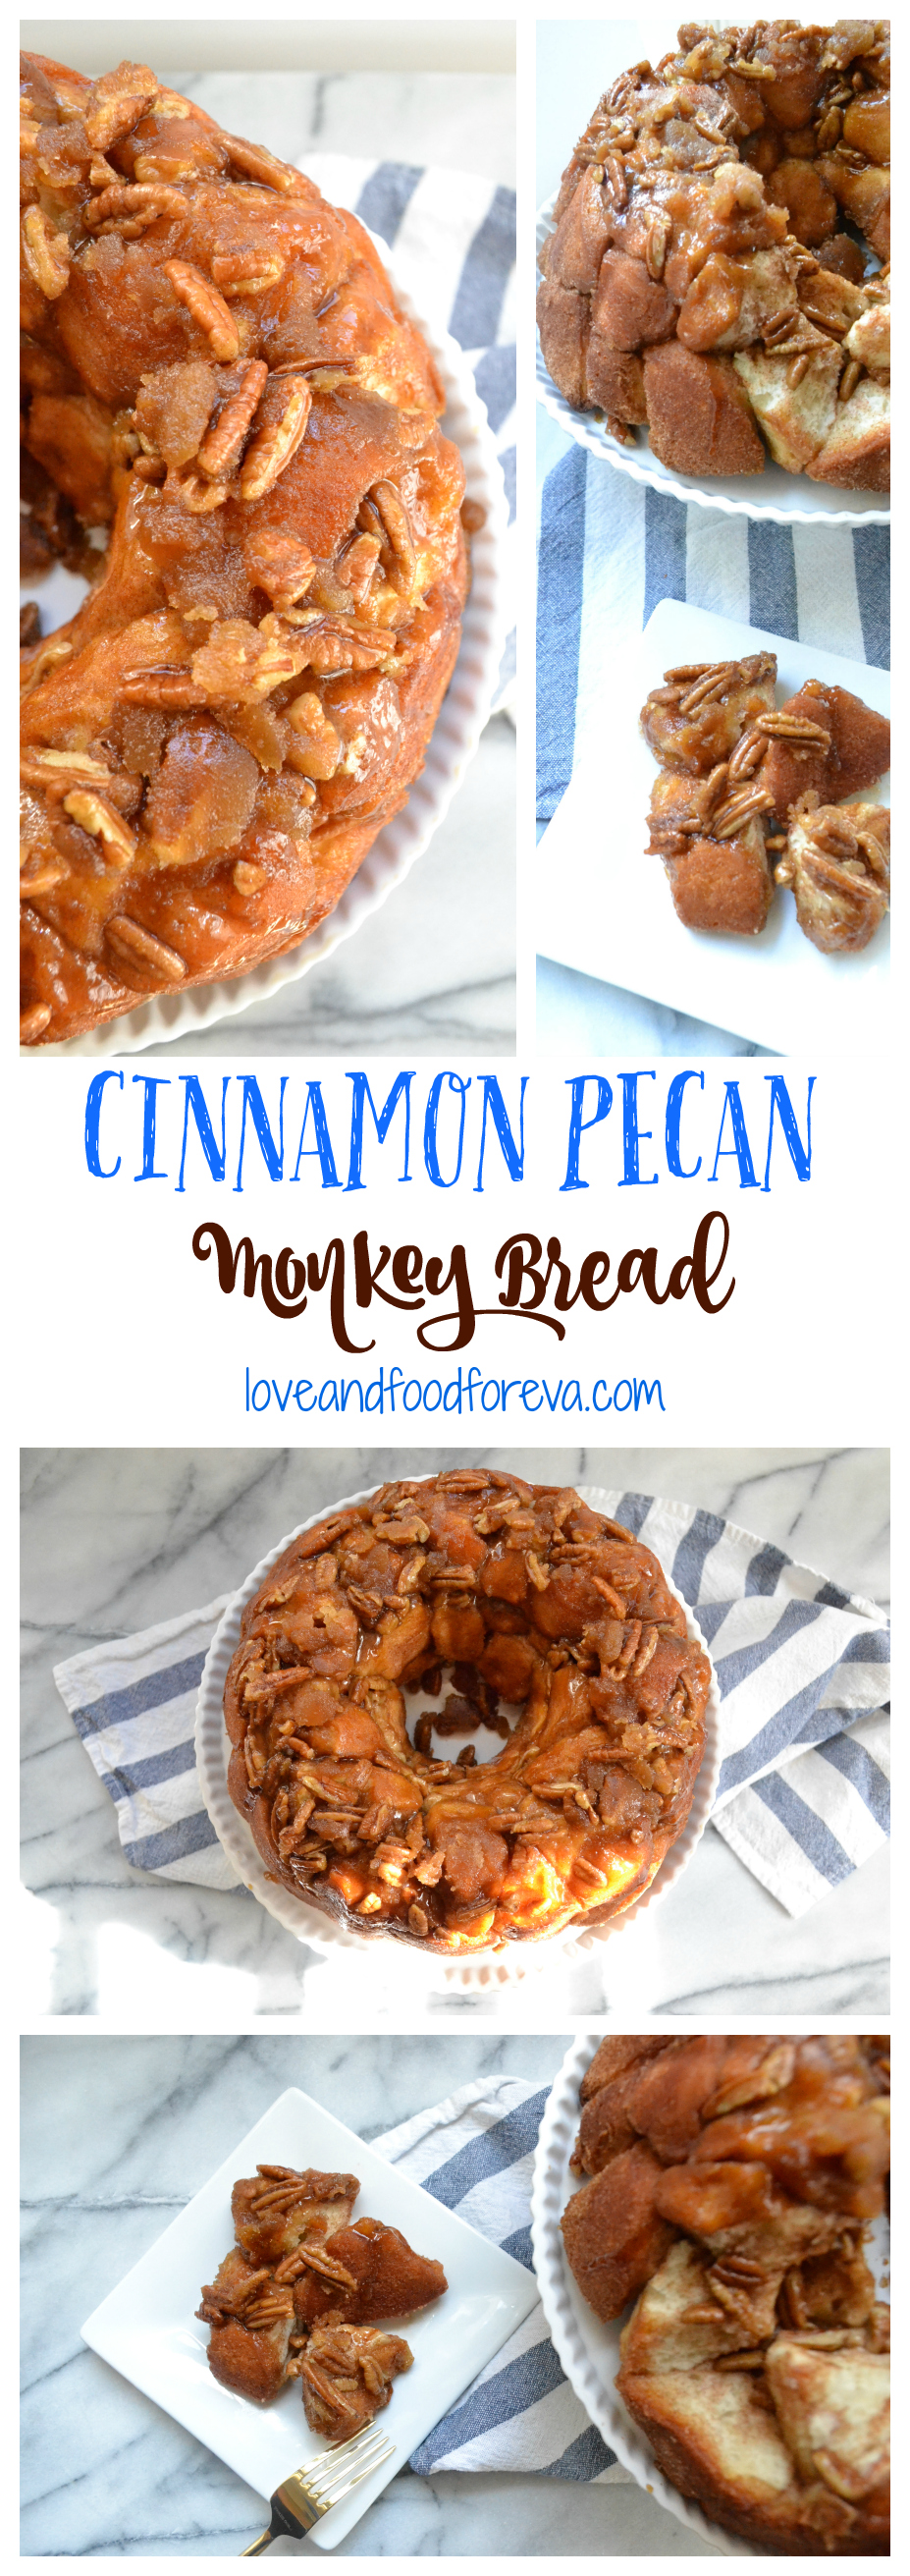 Cinnamon Pecan Monkey Bread - so easy to make and guaranteed to be a crowd favorite!